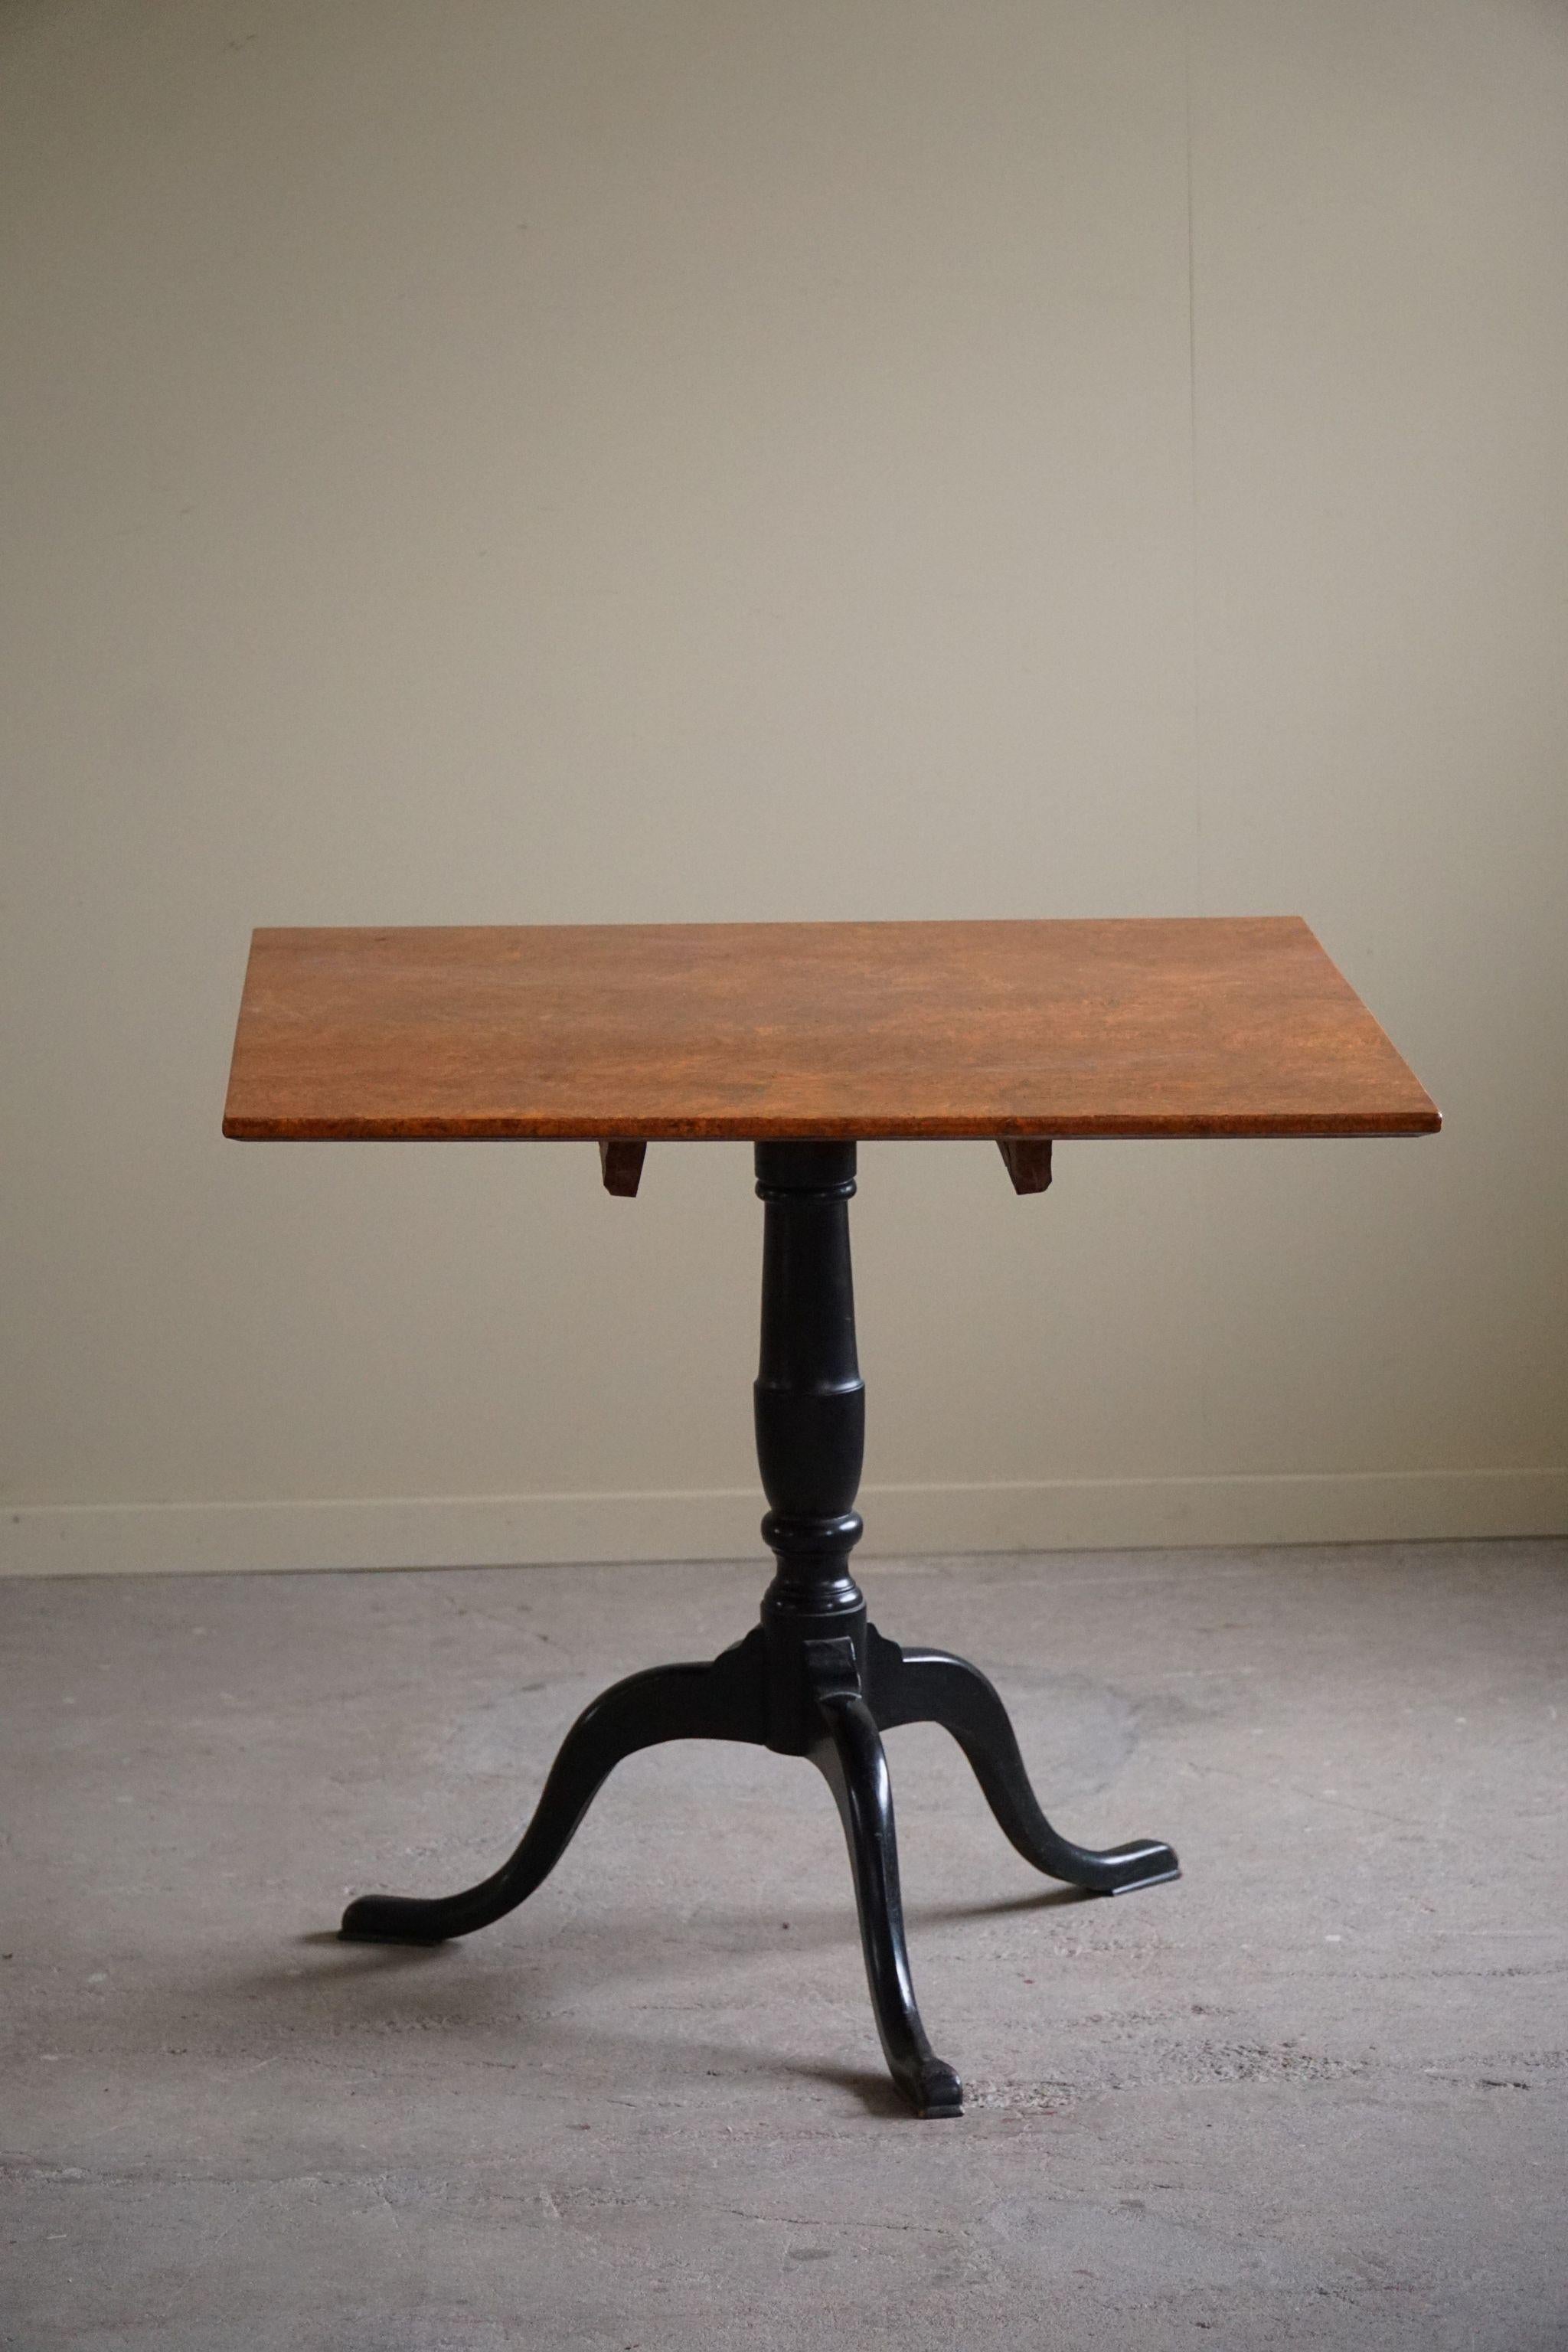 Handcrafted Square Antique Drop Leaf Table in Burl Wood, Swedish, 19th Century In Good Condition For Sale In Odense, DK